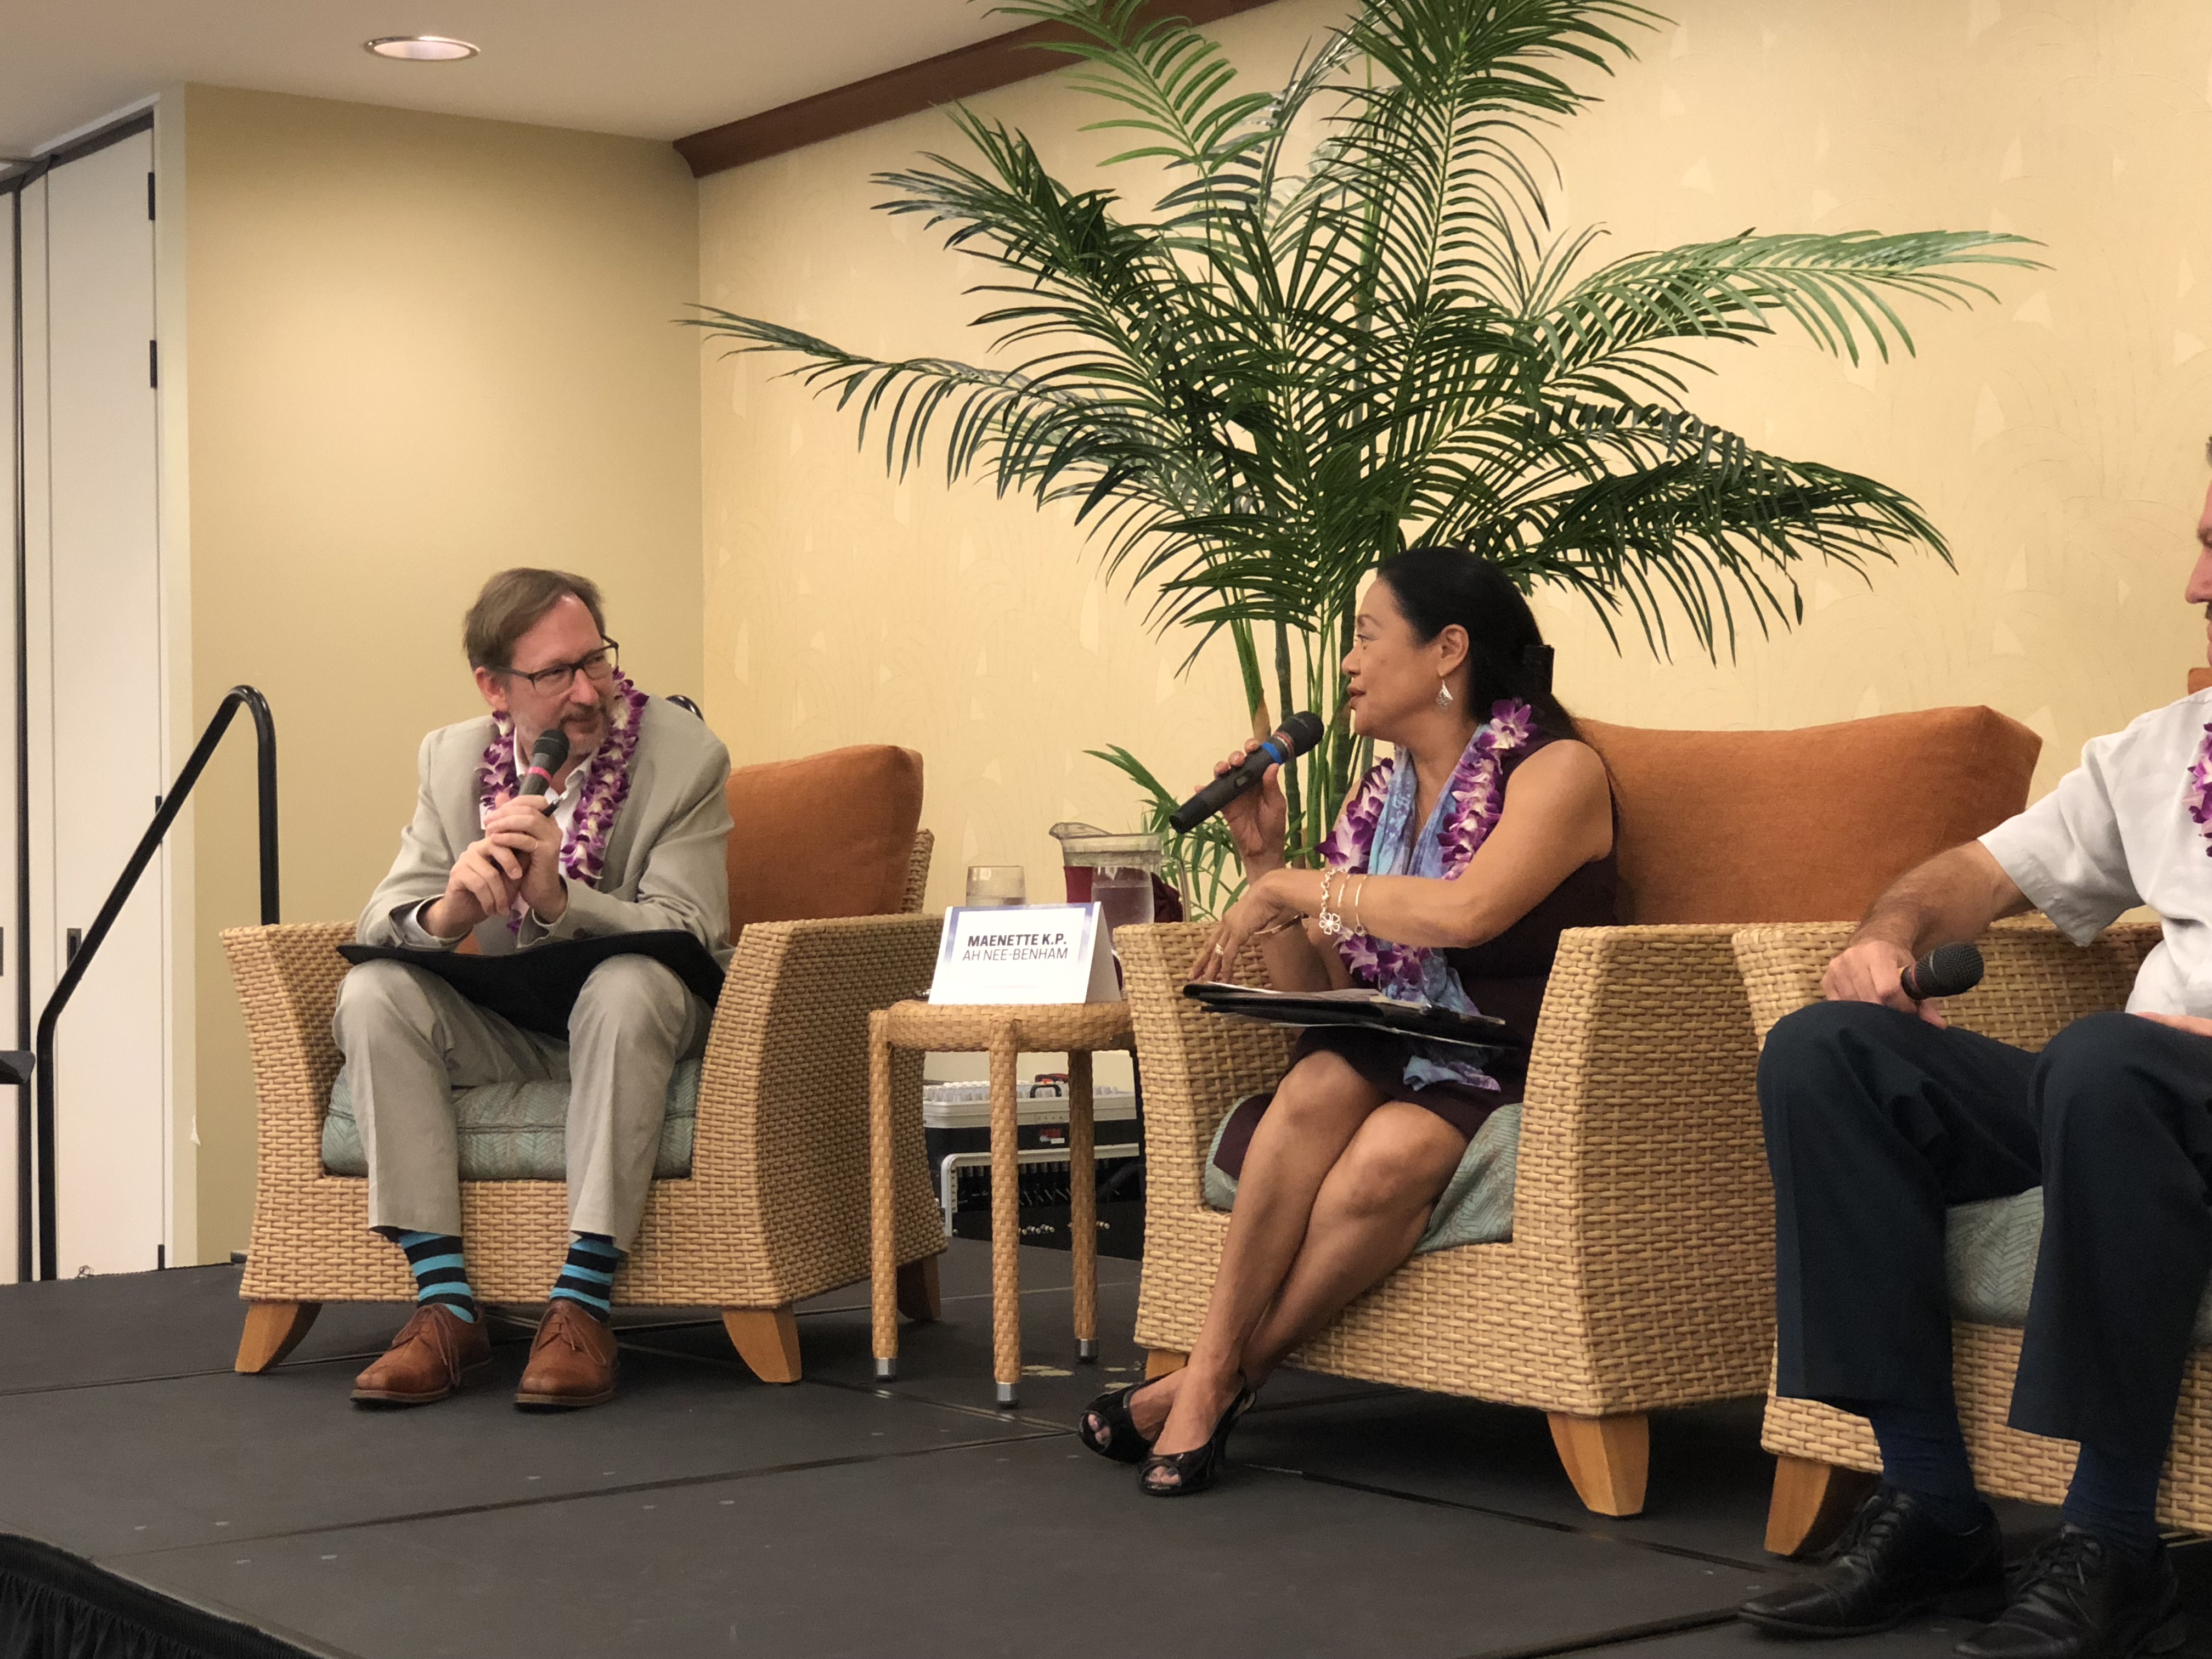 UH West Oʻahu Chancellor Maenette Benham served on the "West Oʻahu Means Business" panel, moderated by Pacific Business News editor-in-chief A. Kam Napier,